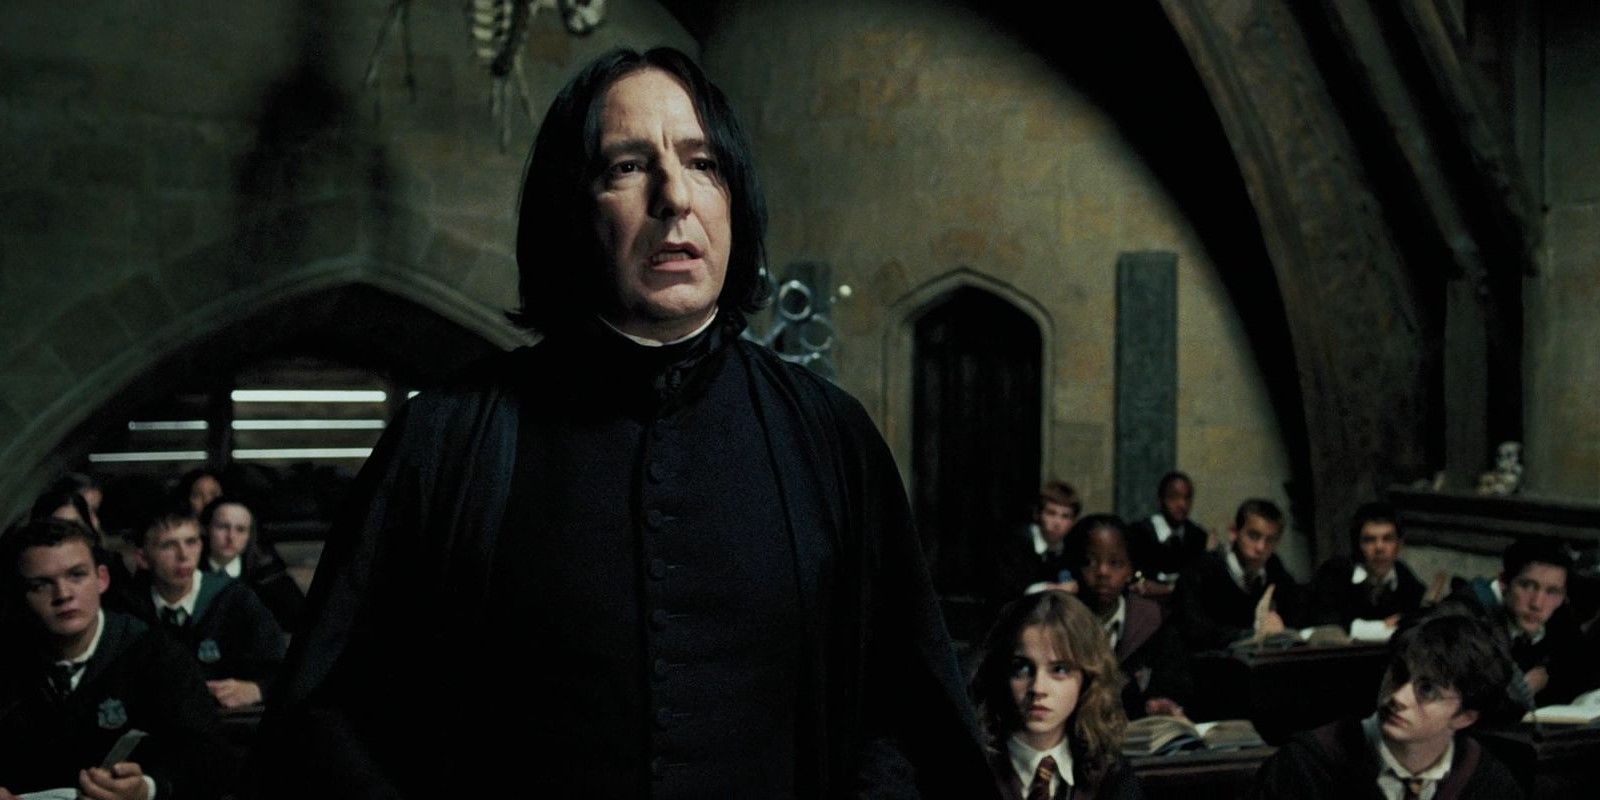 Harry Potter The 25 Most Powerful Potterverse Villains Officially Ranked From Weakest To Strongest